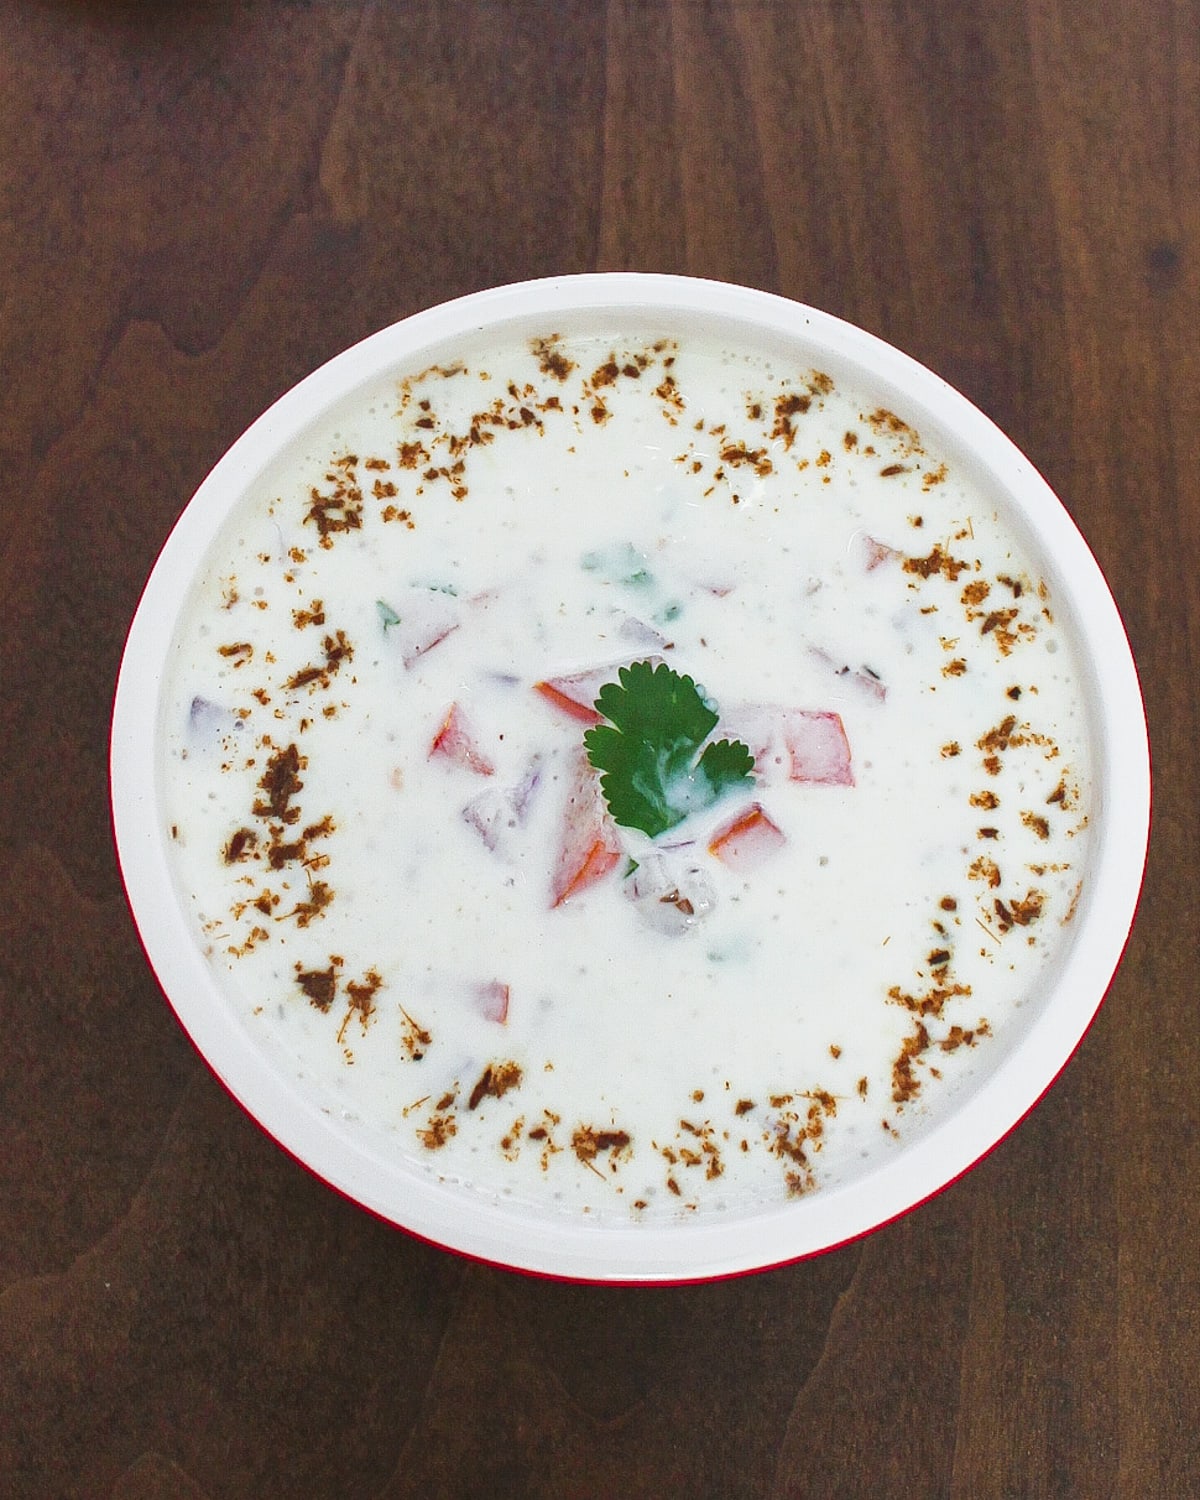 Onion tomato raita served in a bowl that is garnished with cilantro and spice powder.